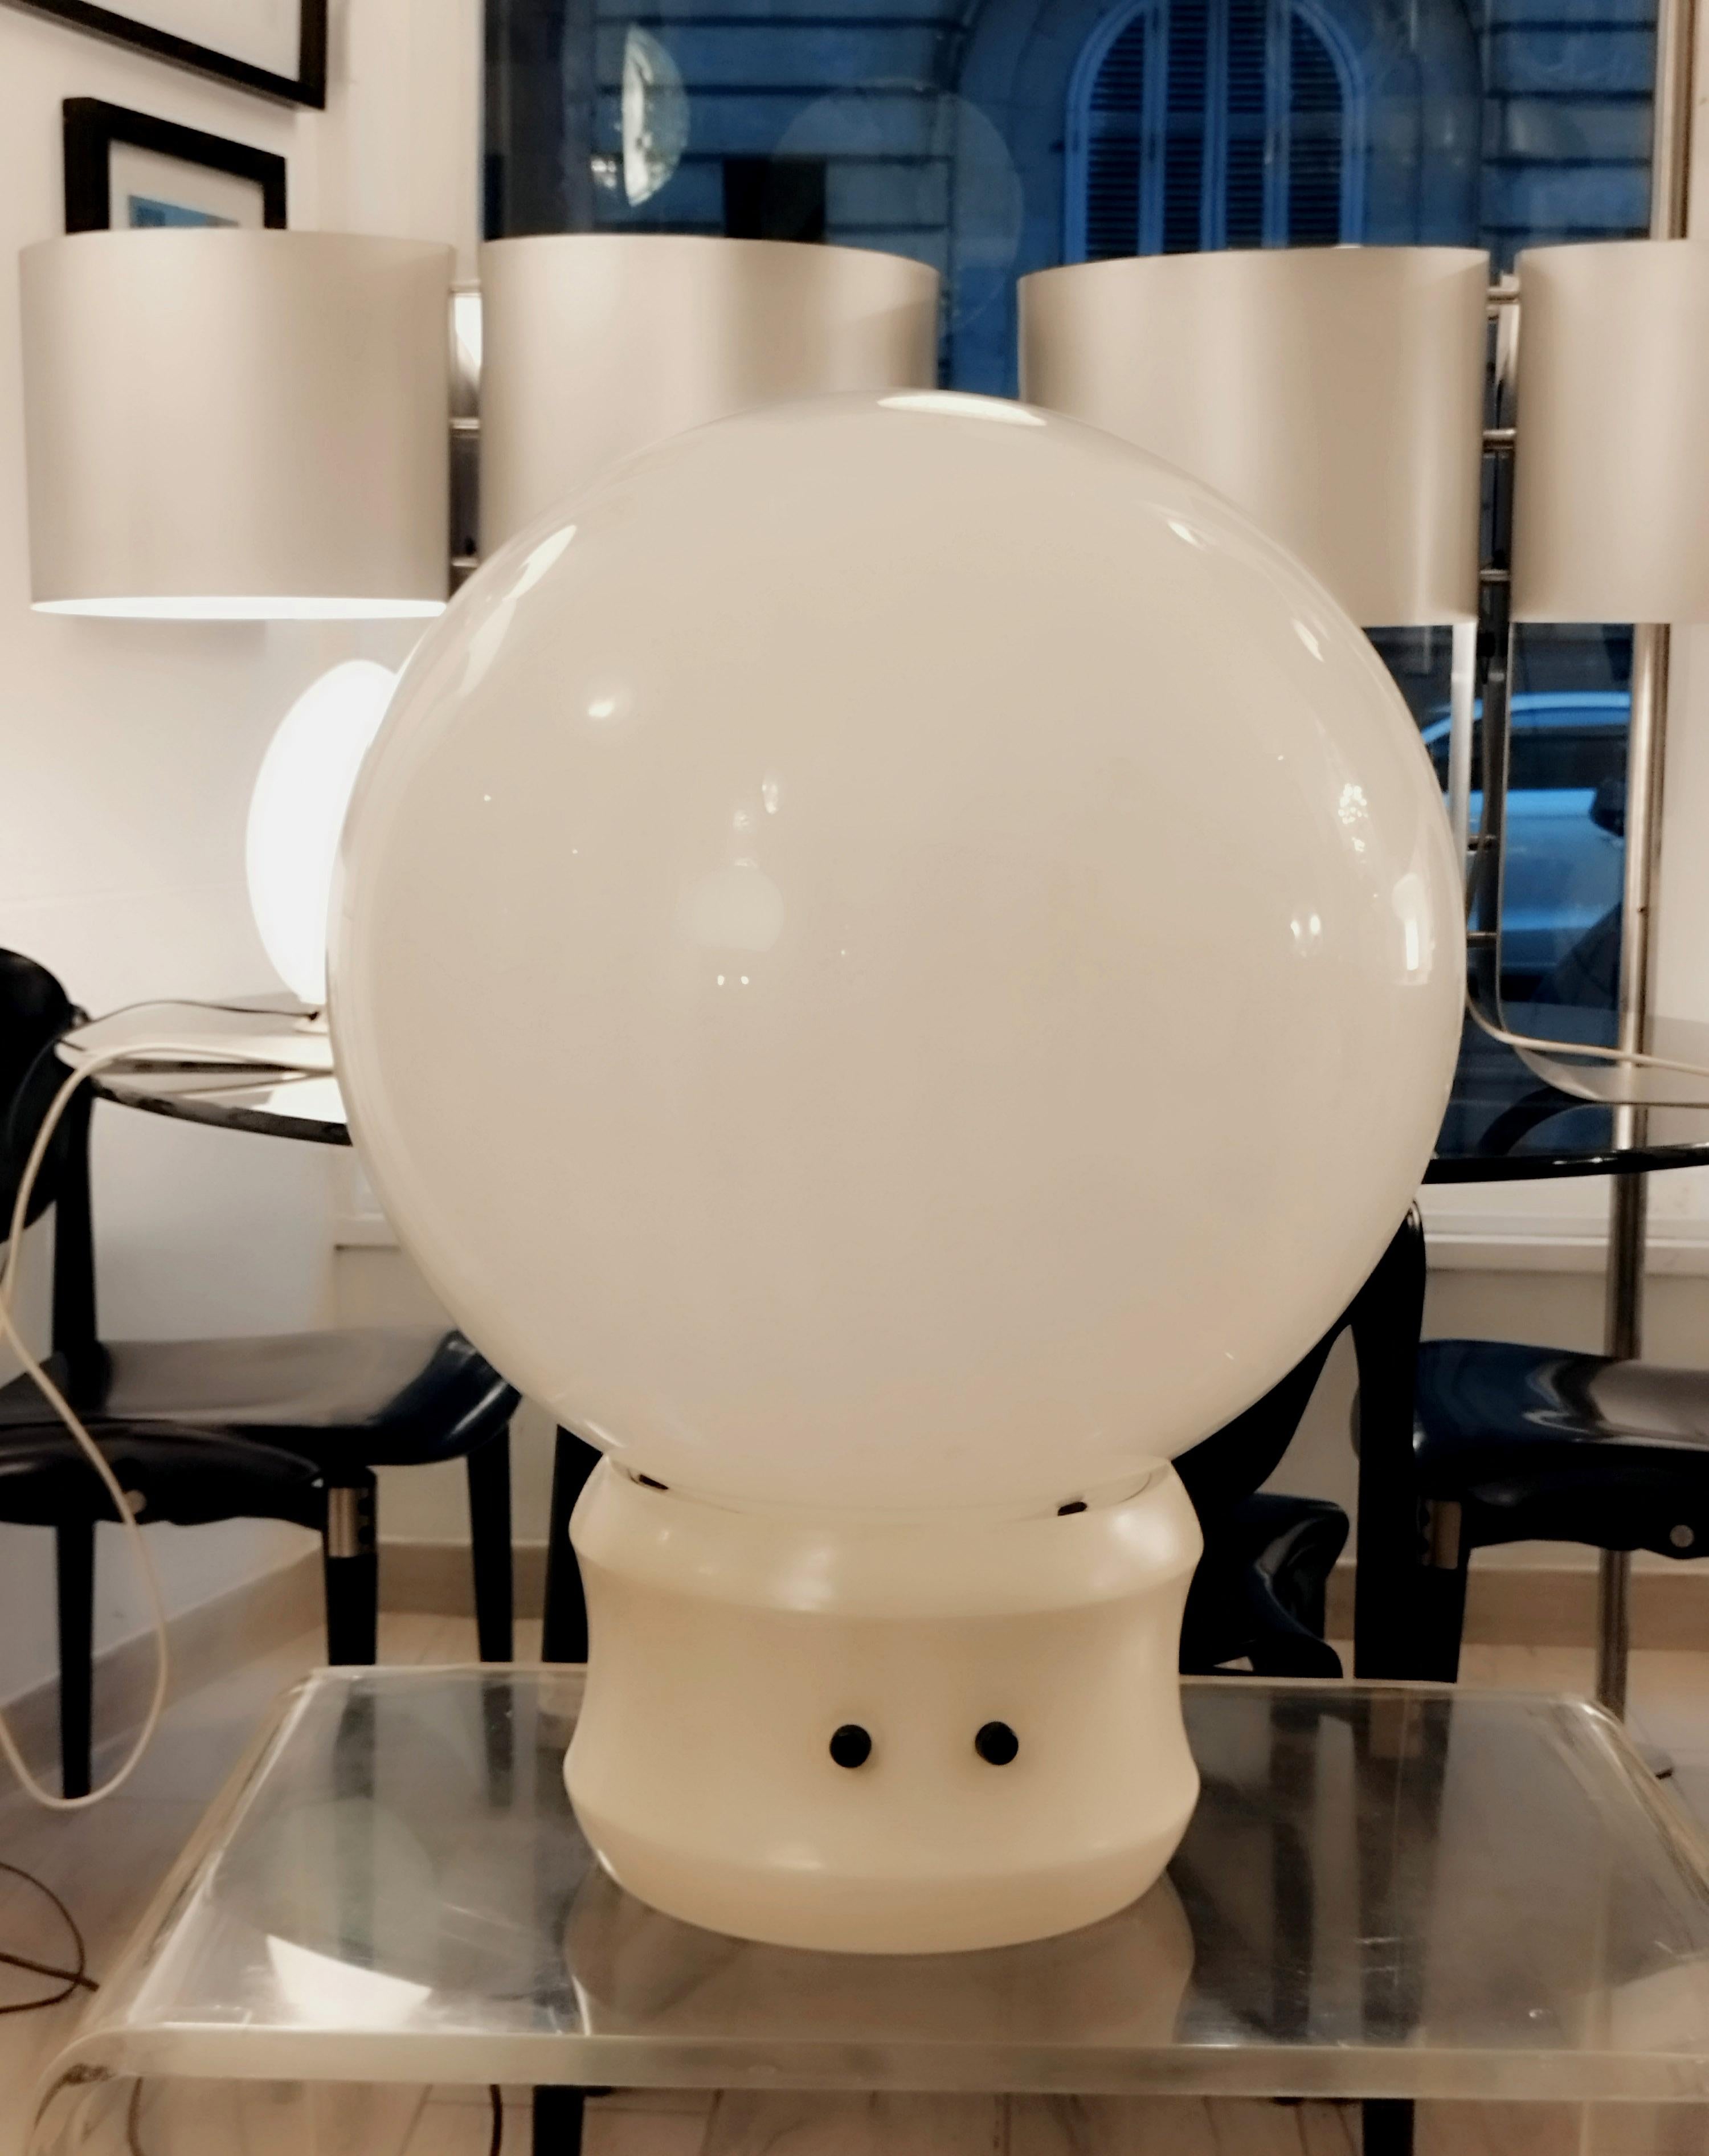 Sfera Gigante grande table or floor lamp by Elio Martinelli for Martinelli Luce.
The white metal base with two different switches supports a frosted glass shade with a diameter of 50 cm.